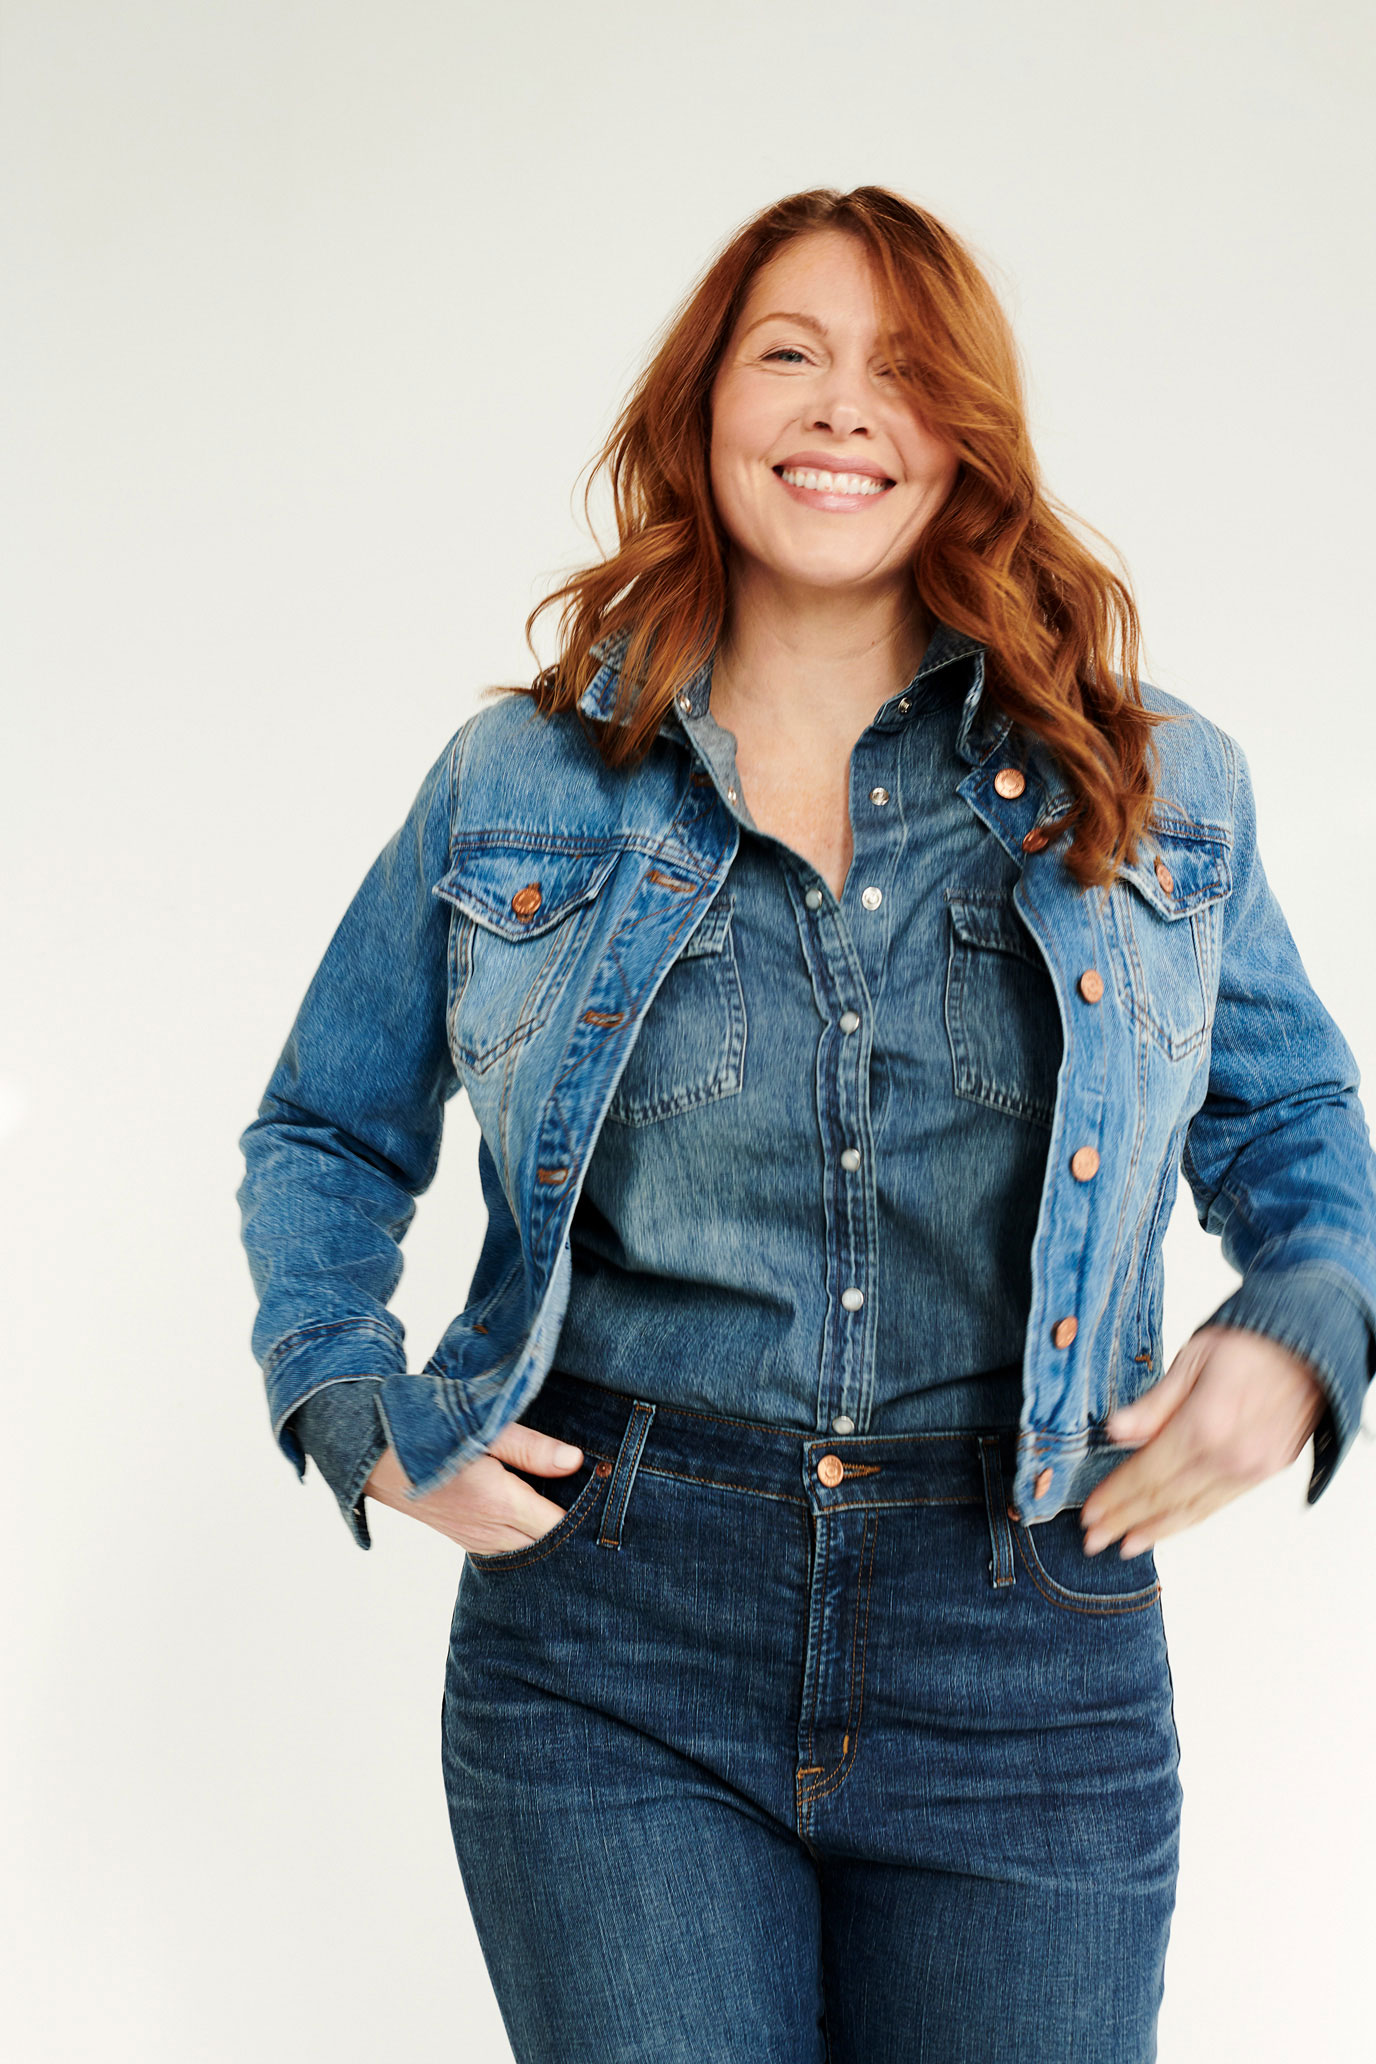 Red-haired female model styled in denim outfit